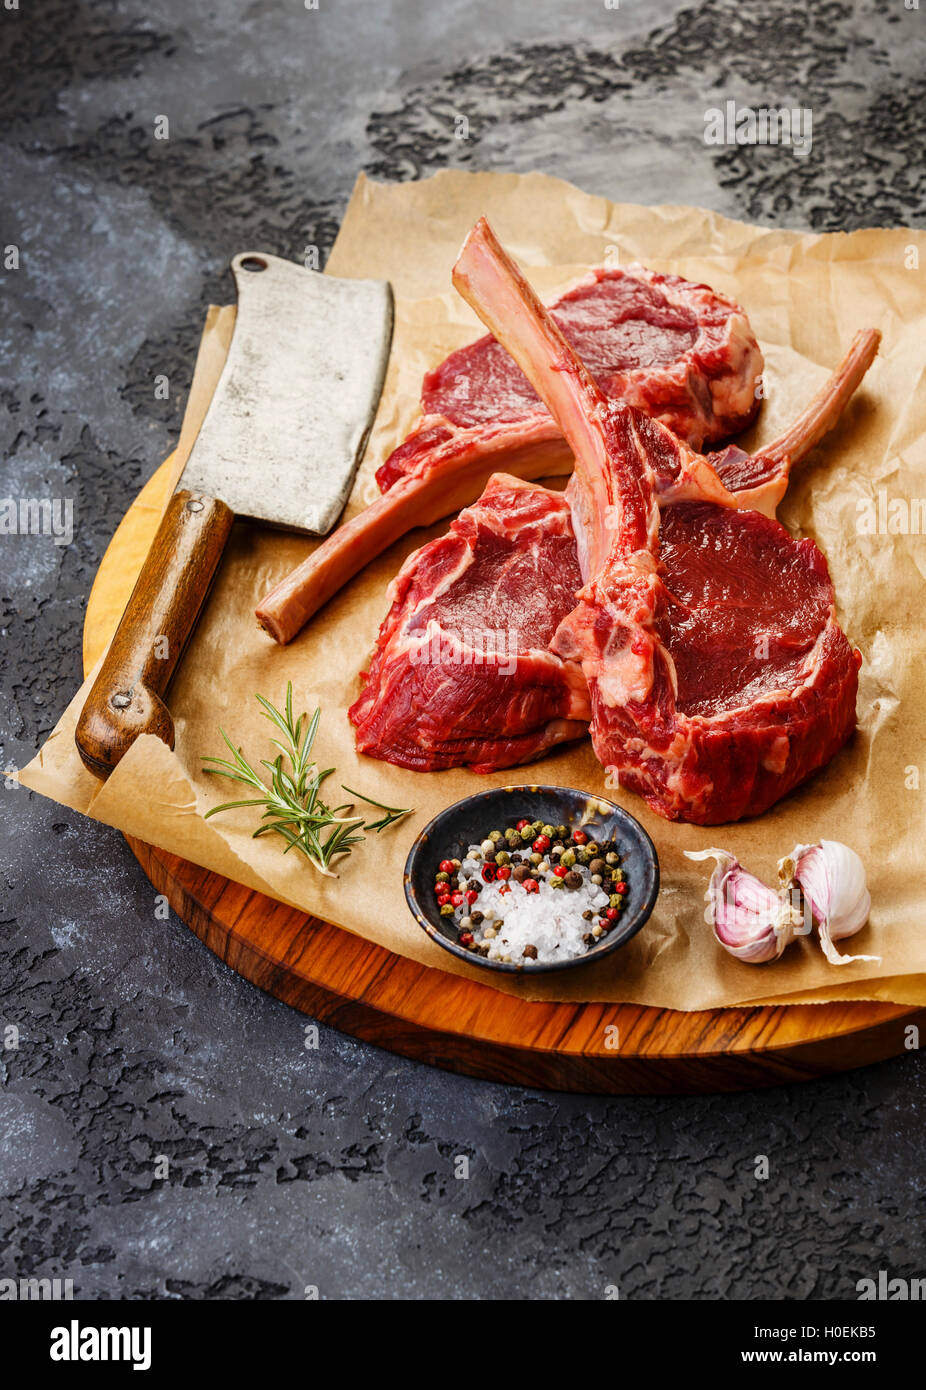 Raw fresh meat Veal ribs Steak on bone and Meat cleaver on dark background Stock Photo